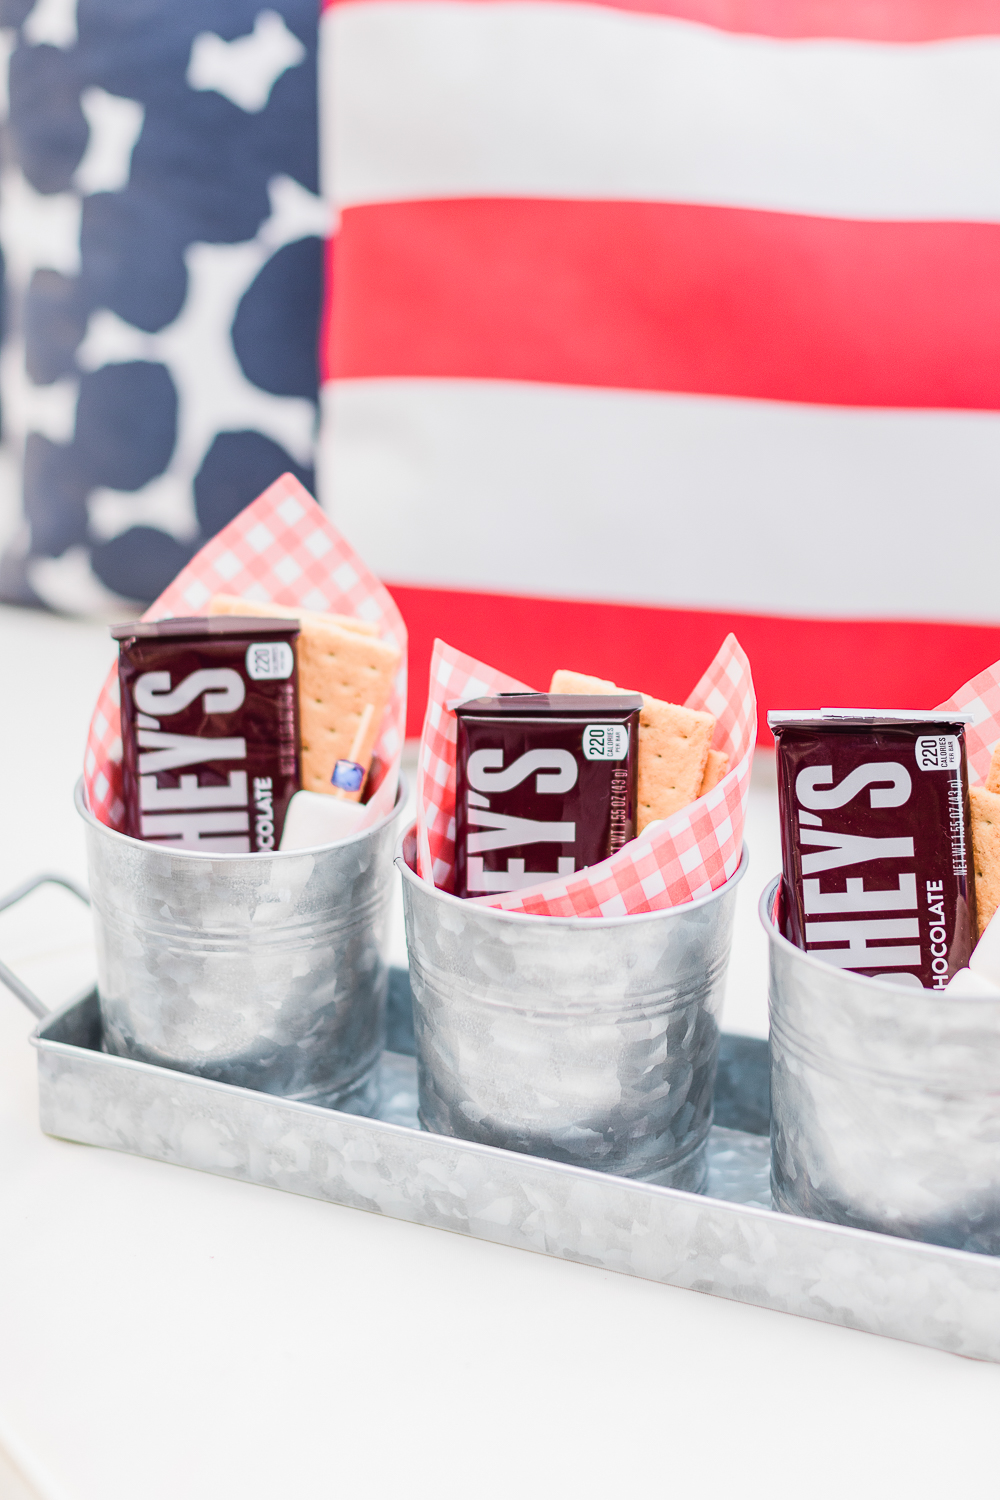 Customized 4th of July smores kits made by southern lifestyle blogger Stephanie Ziajka on Diary of a Debutante